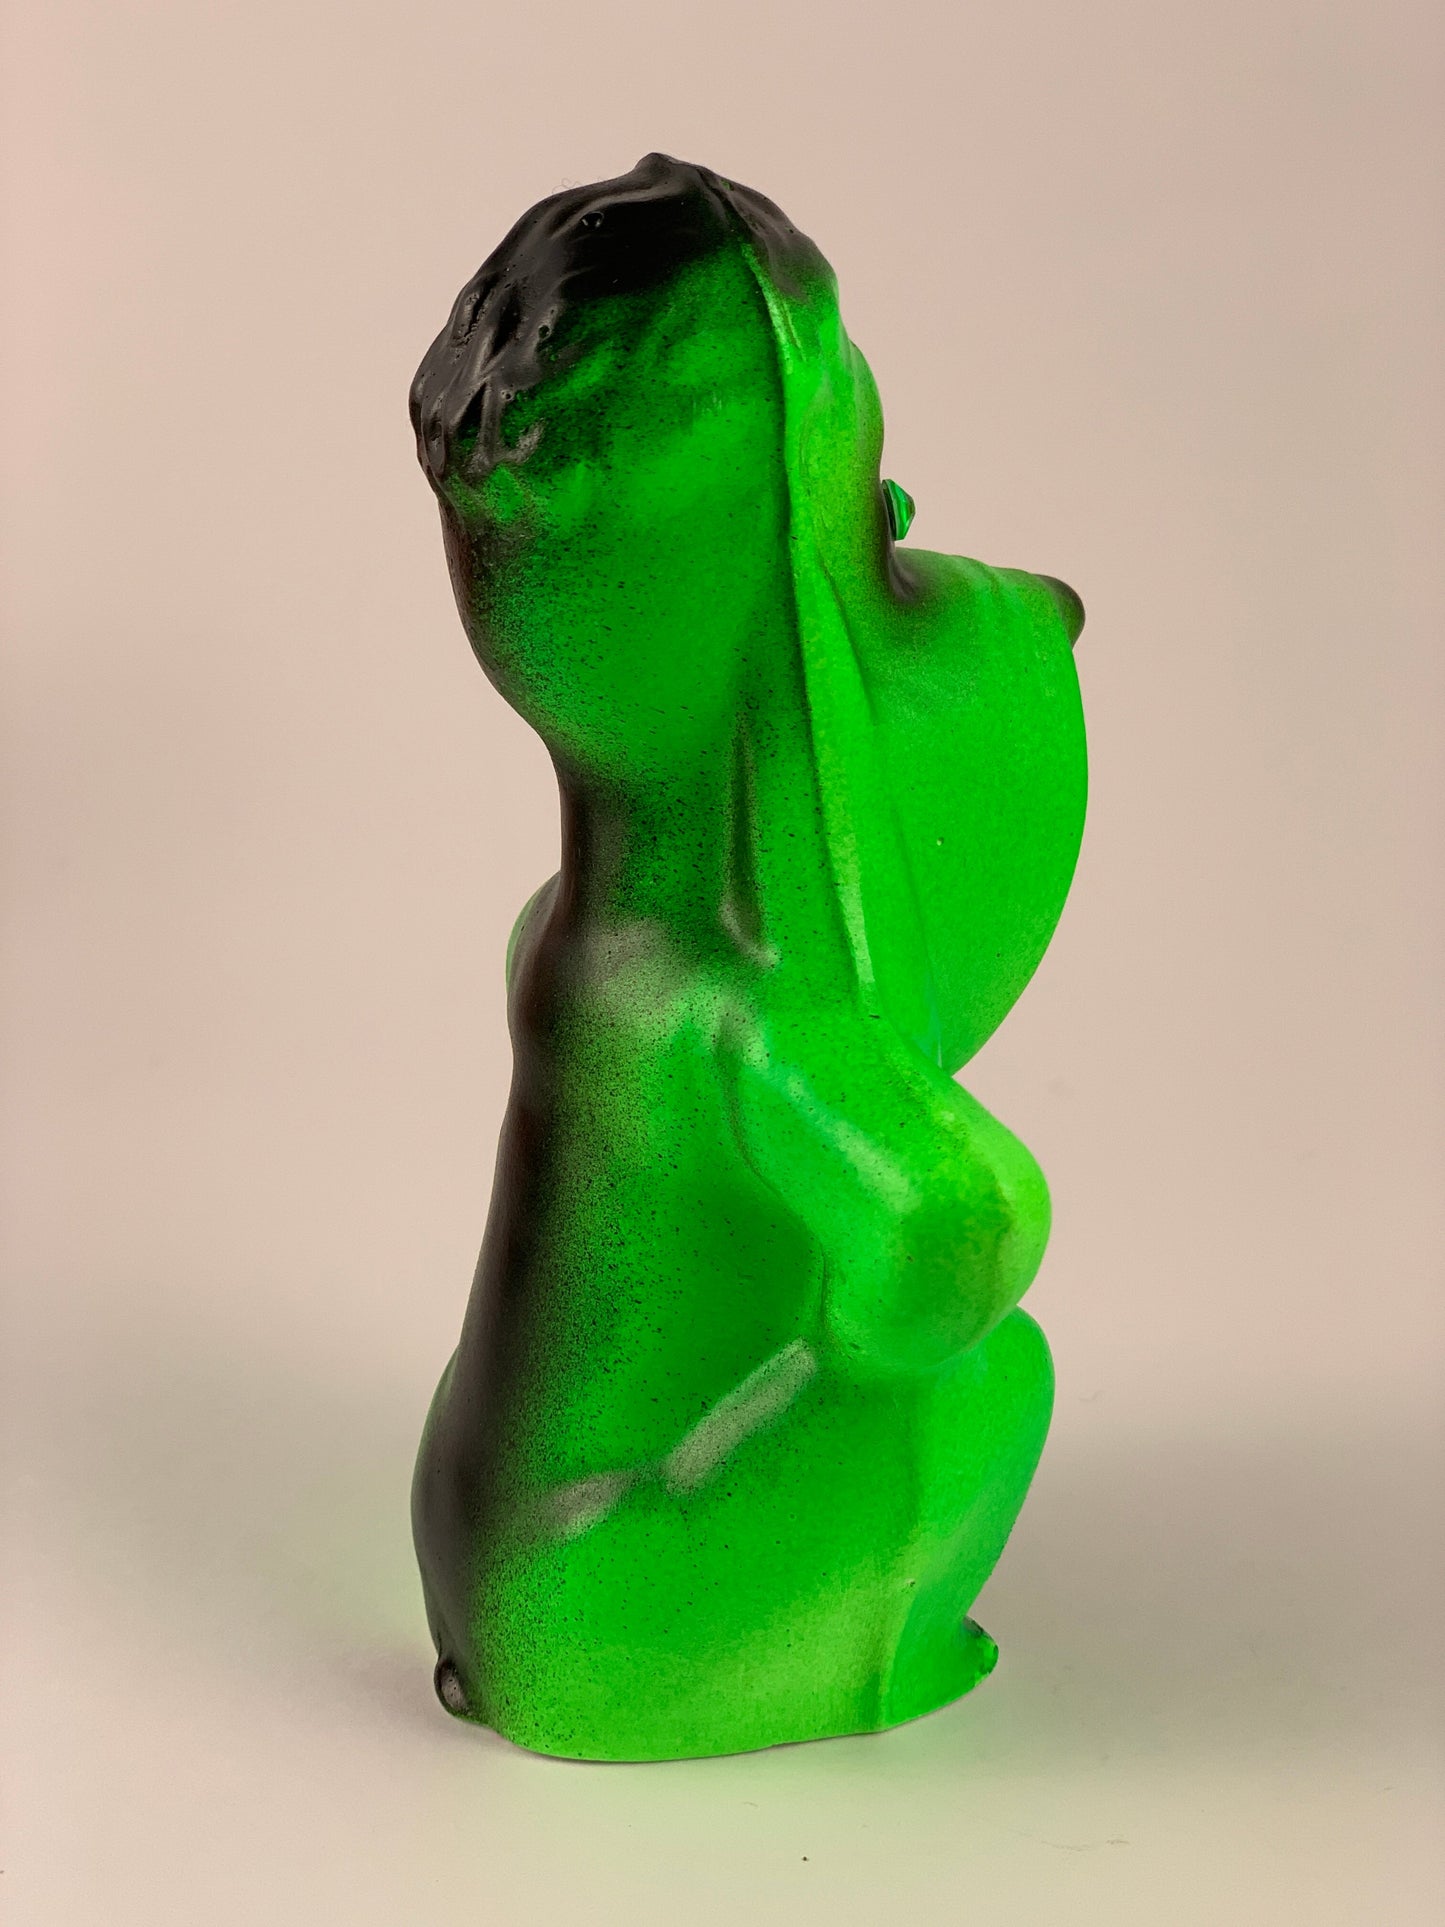 Mister Droopy Chalkware: Fluorescent Green and Black